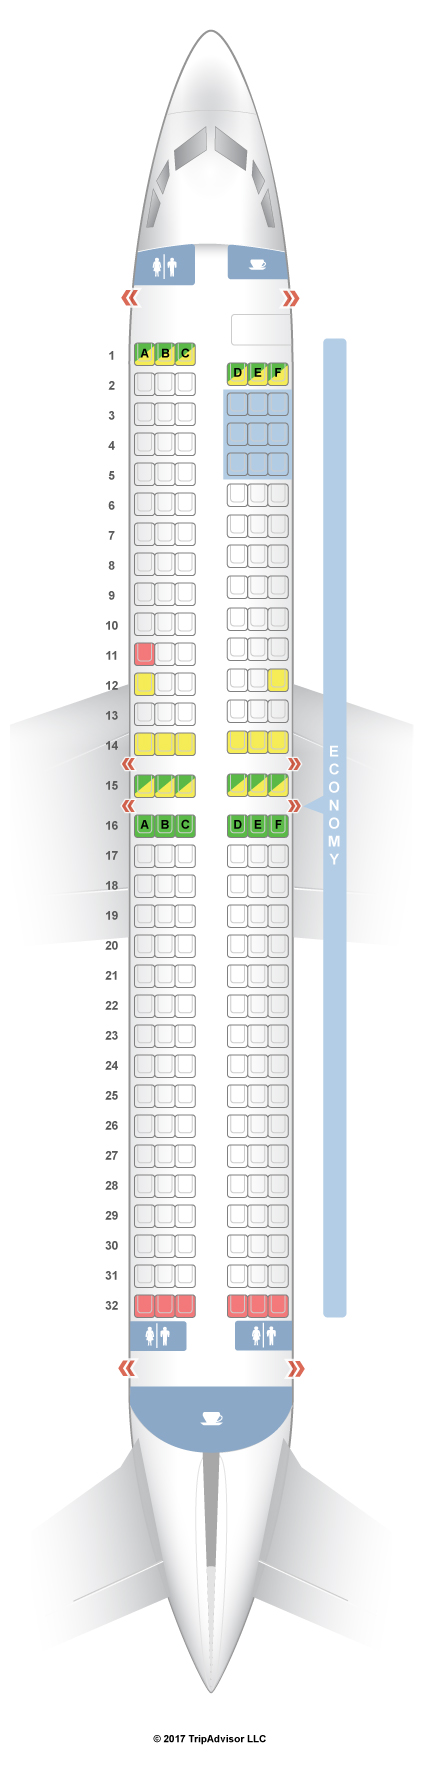 Boeing 737 200 Seating Chart